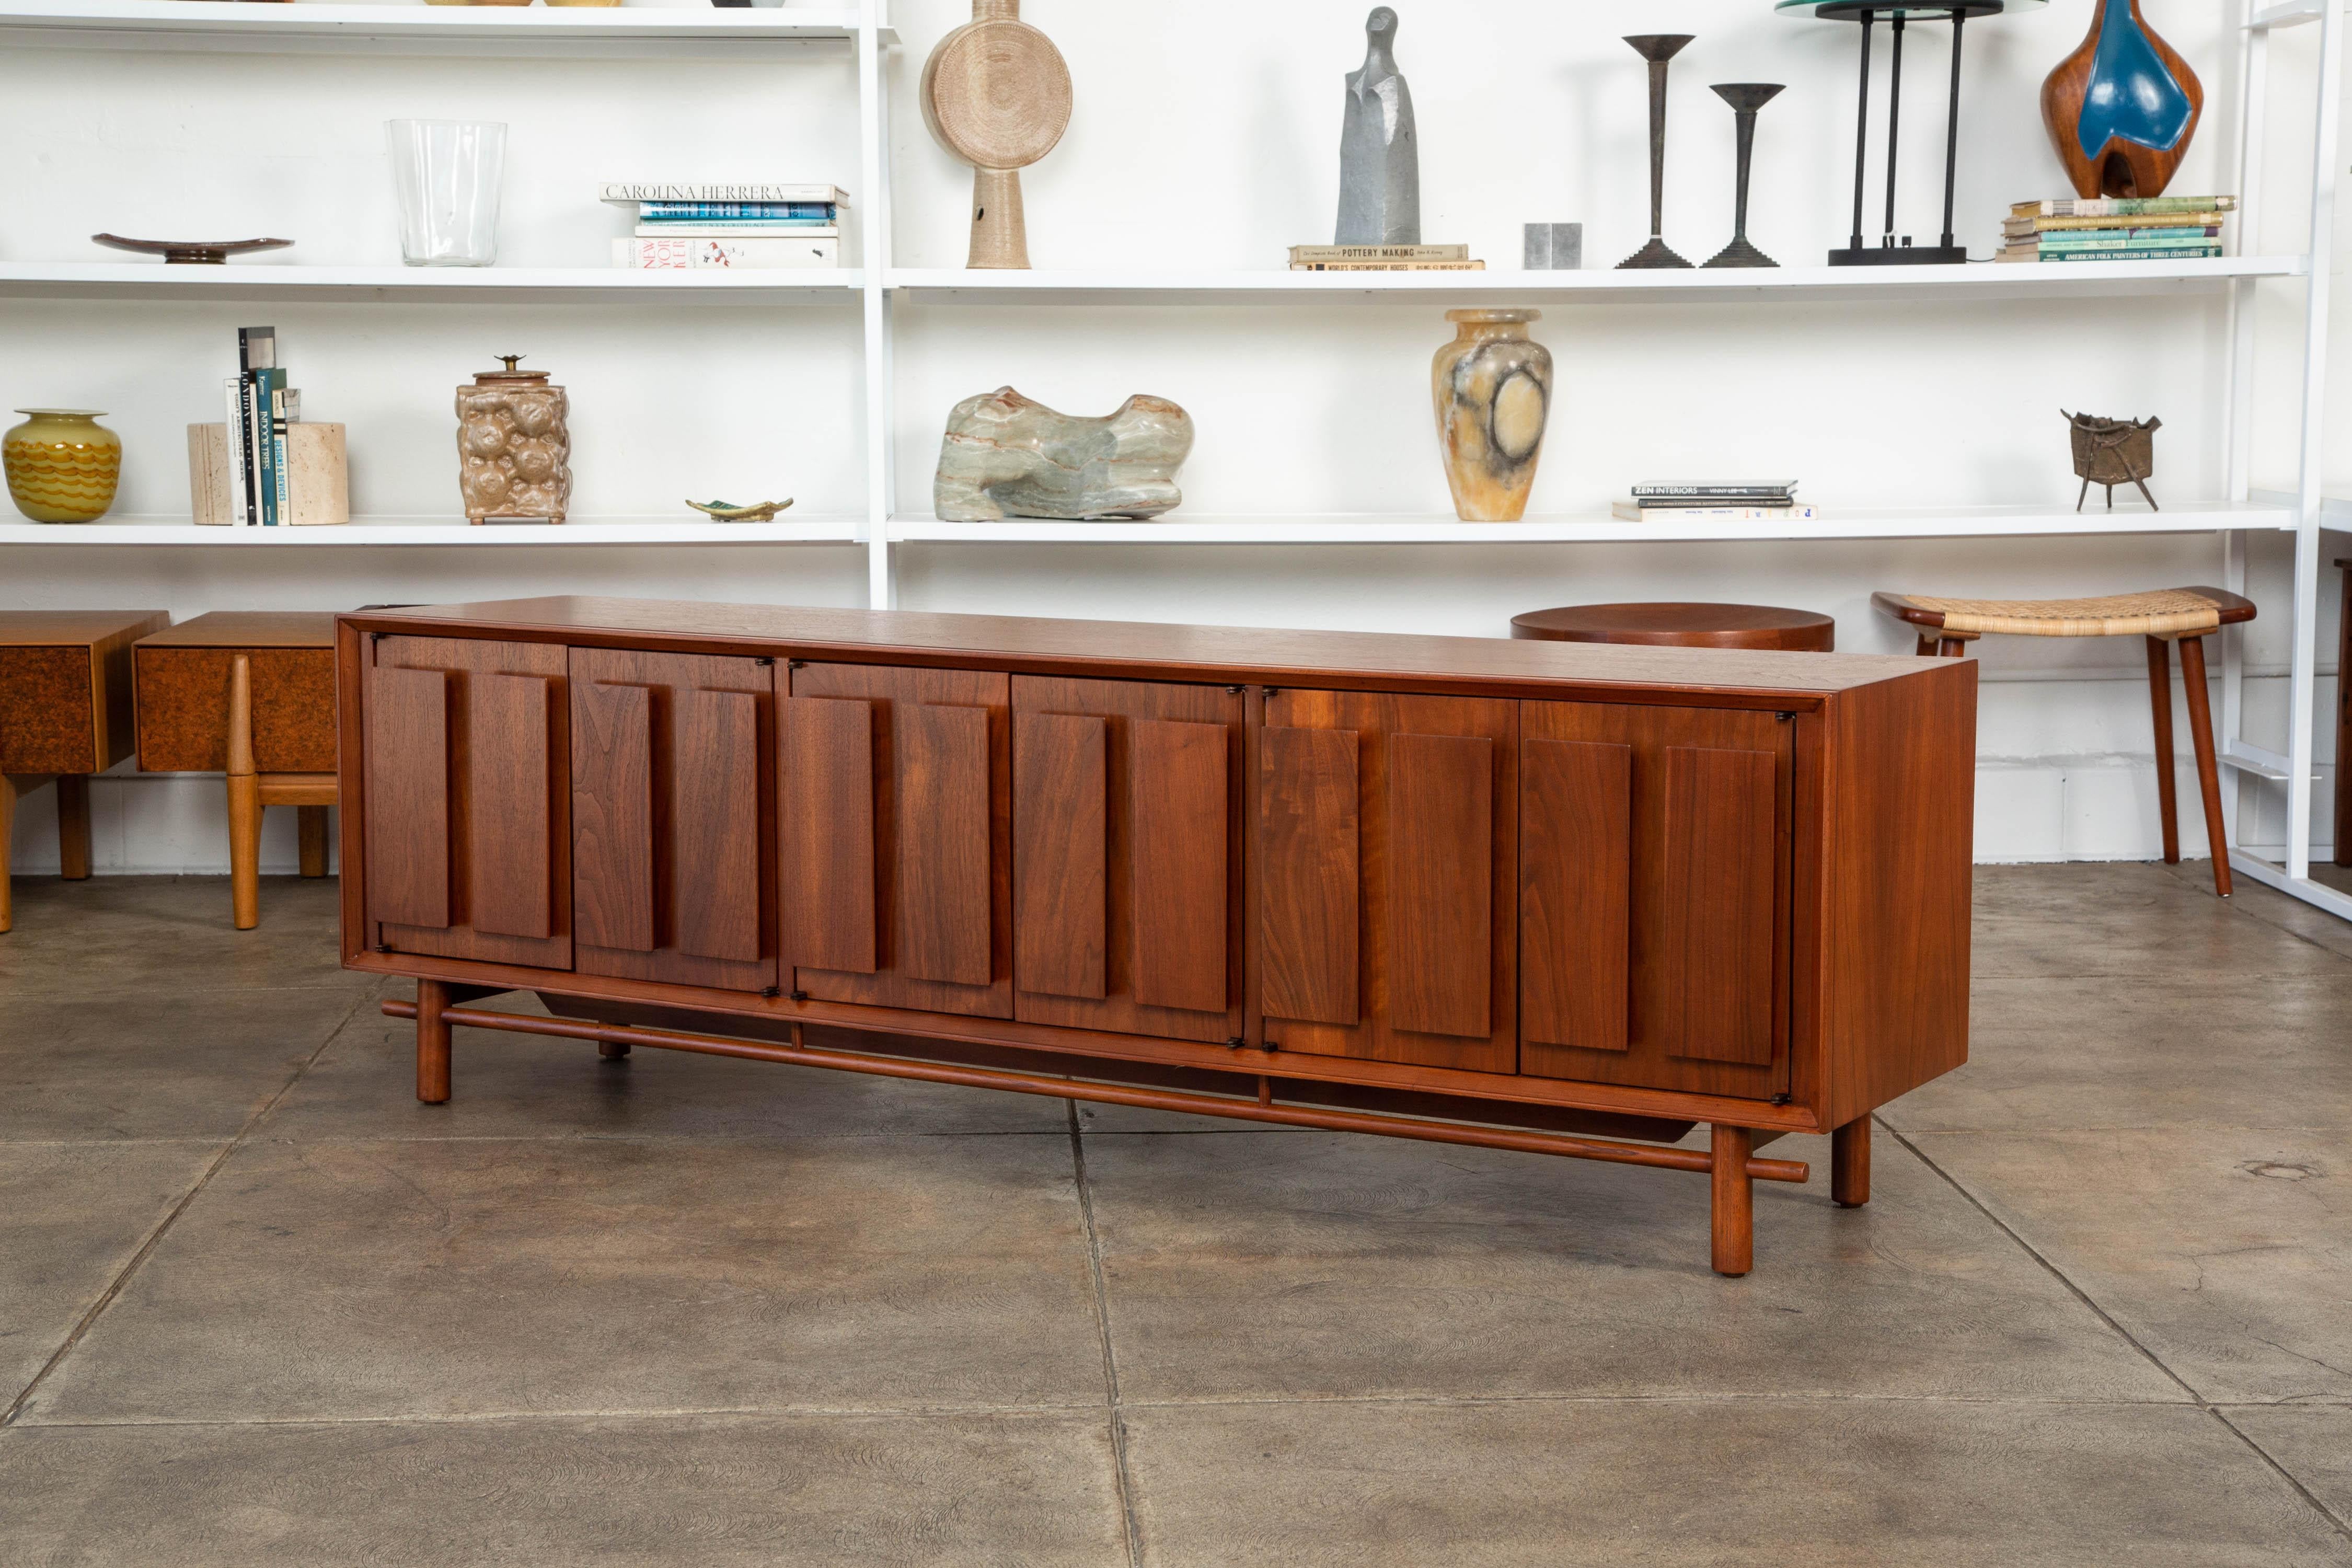 Walnut credenza by Lane Furniture Co., circa 1960s the cabinet features a walnut frame with beautiful grain, featuring three sets of side by side doors. Each door has two rectangular walnut panels decorating the front. The inside compartments have